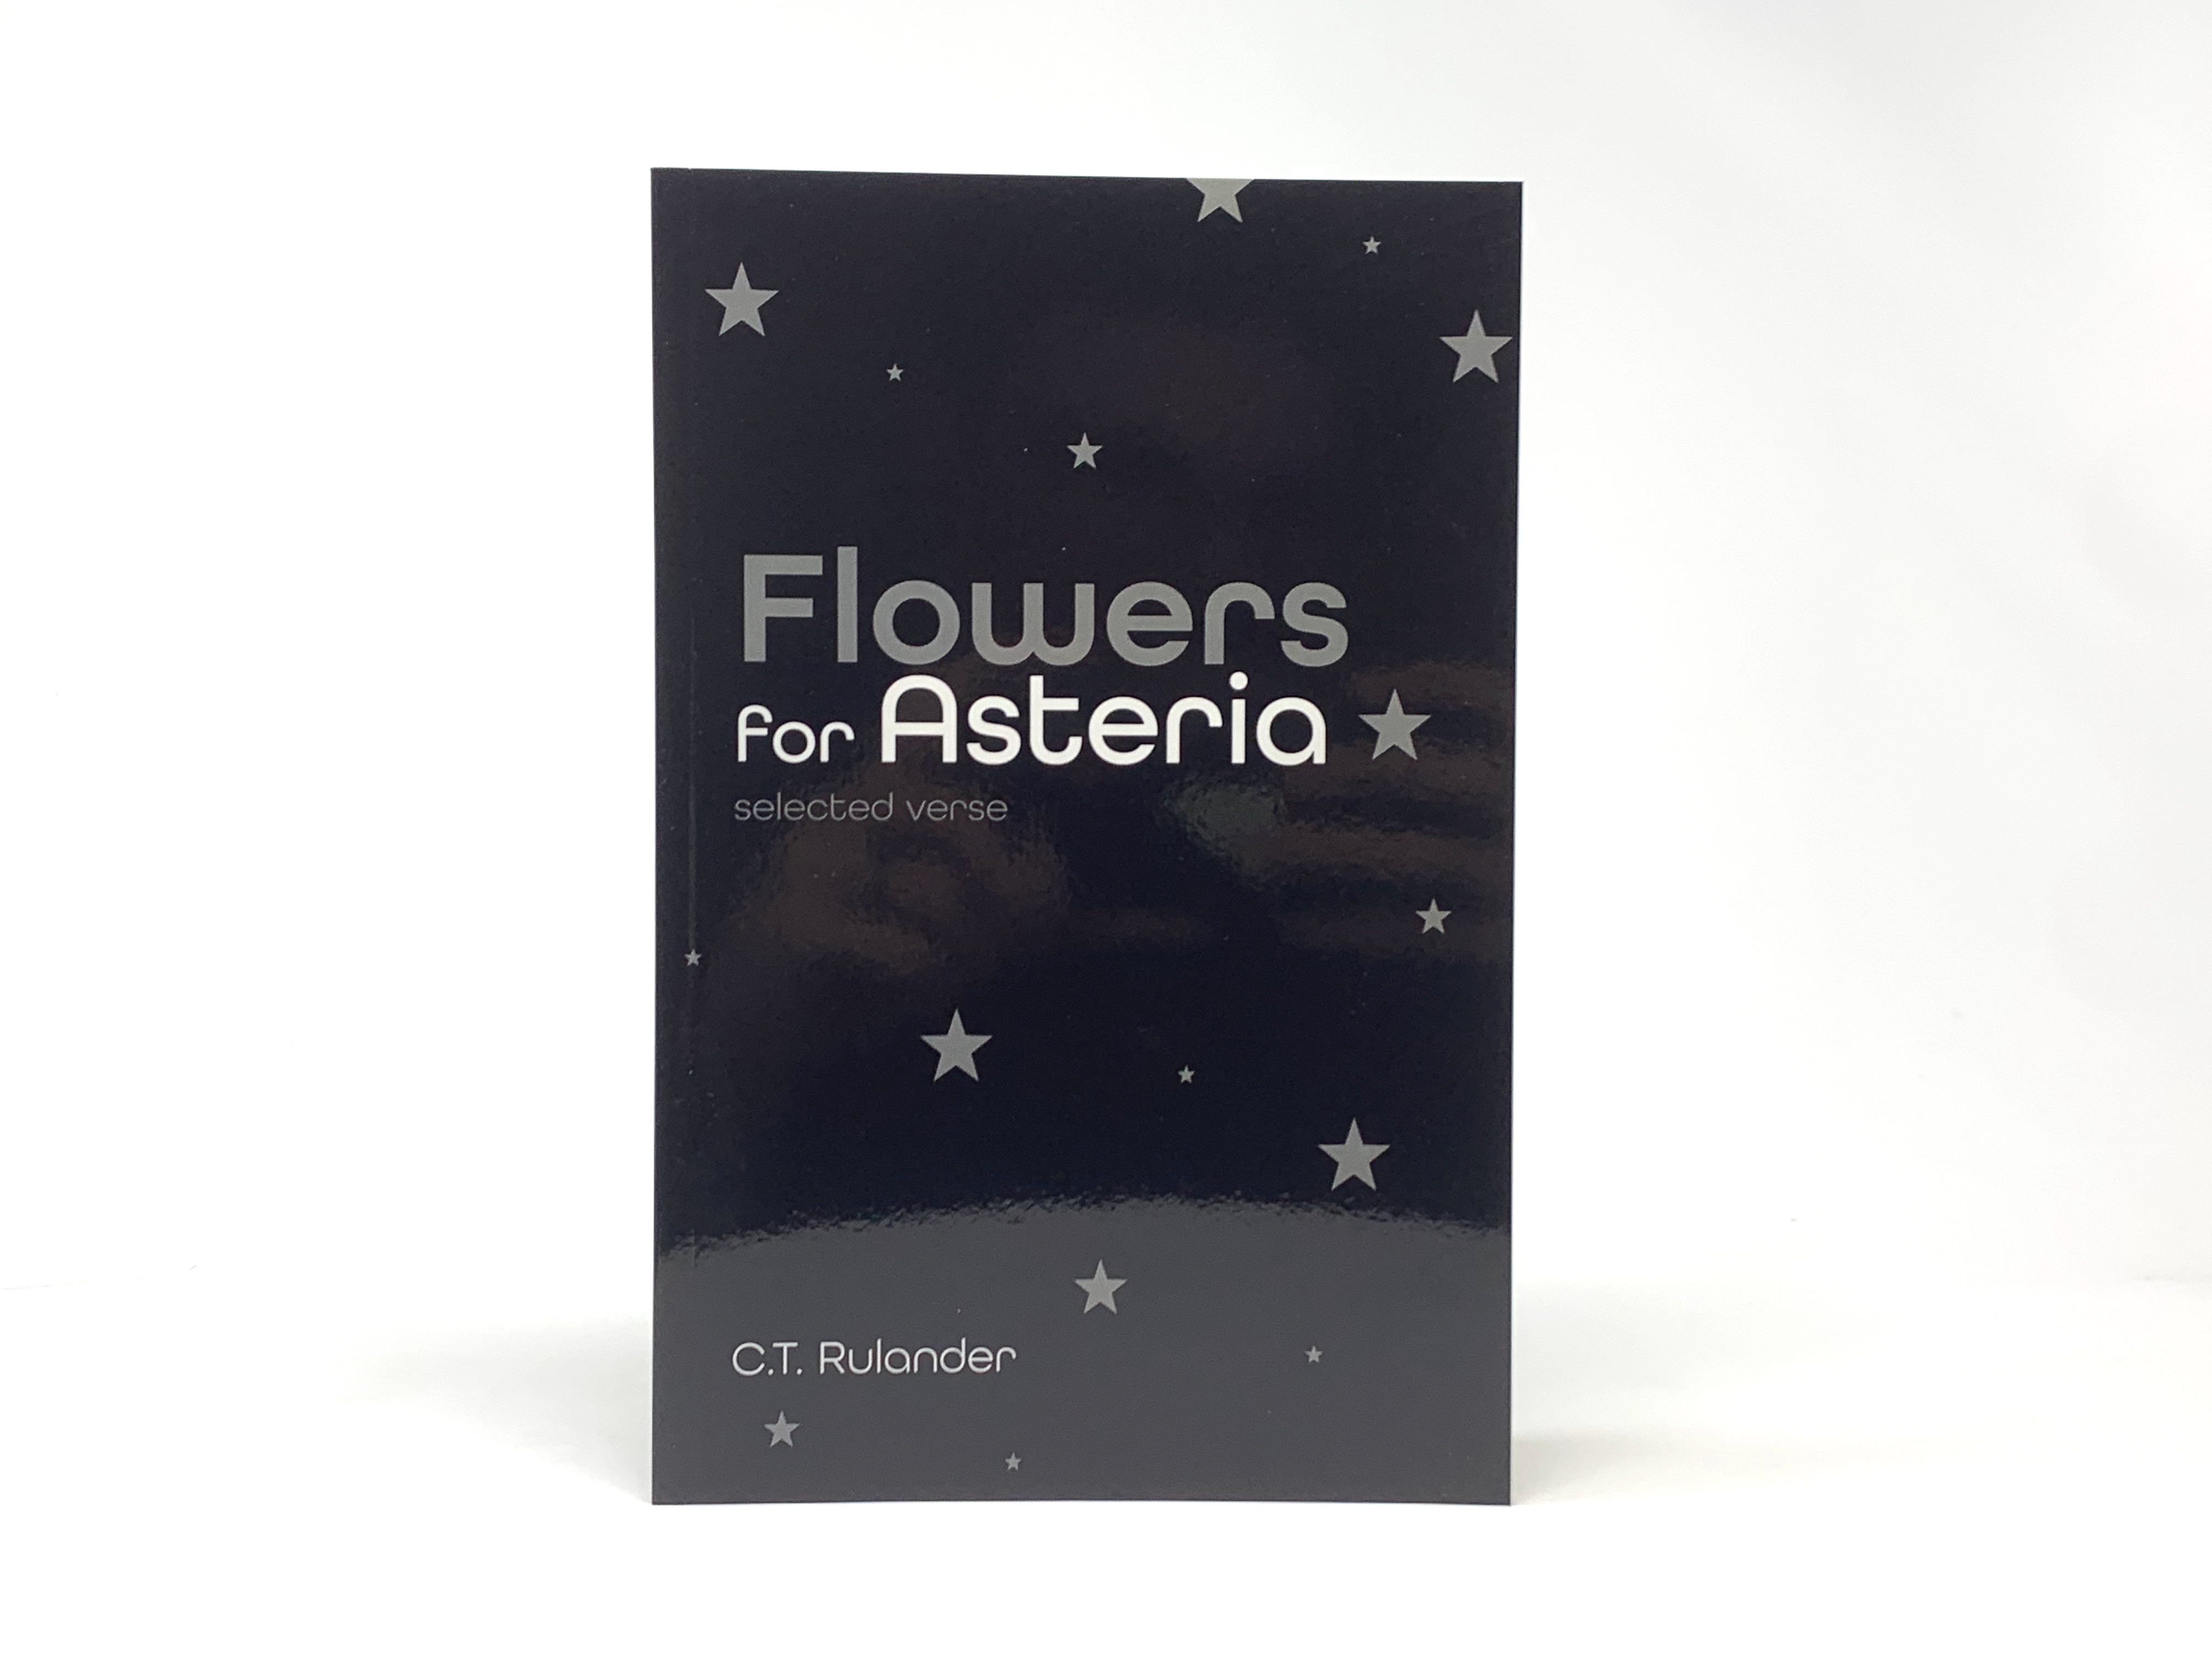 "Flowers for Asteria" book cover 